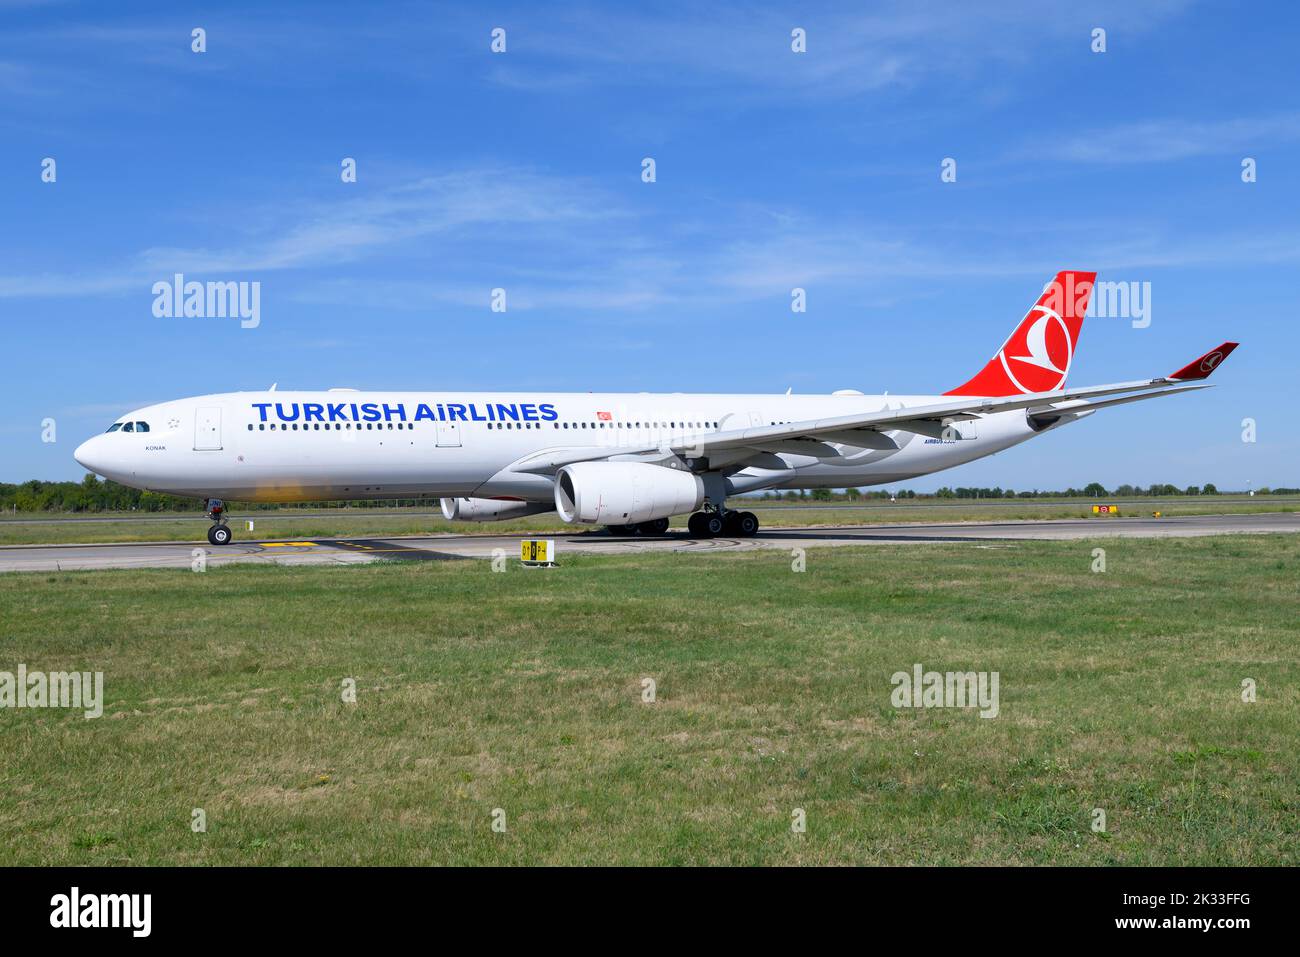 Turkish Airlines Airbus A330. Aereo A330-300 di Turkish Airlines. Foto Stock